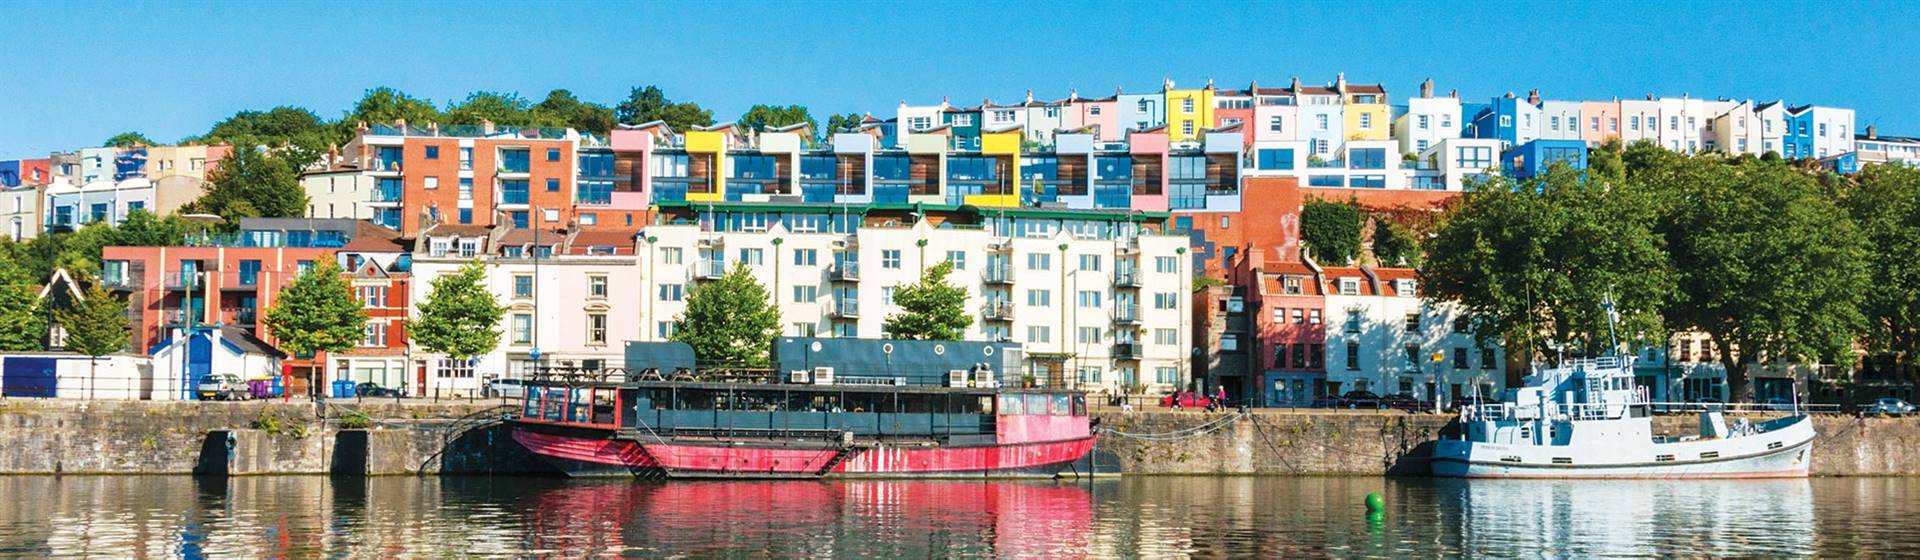 Cardiff & Bristol - A Tale of Two Cities